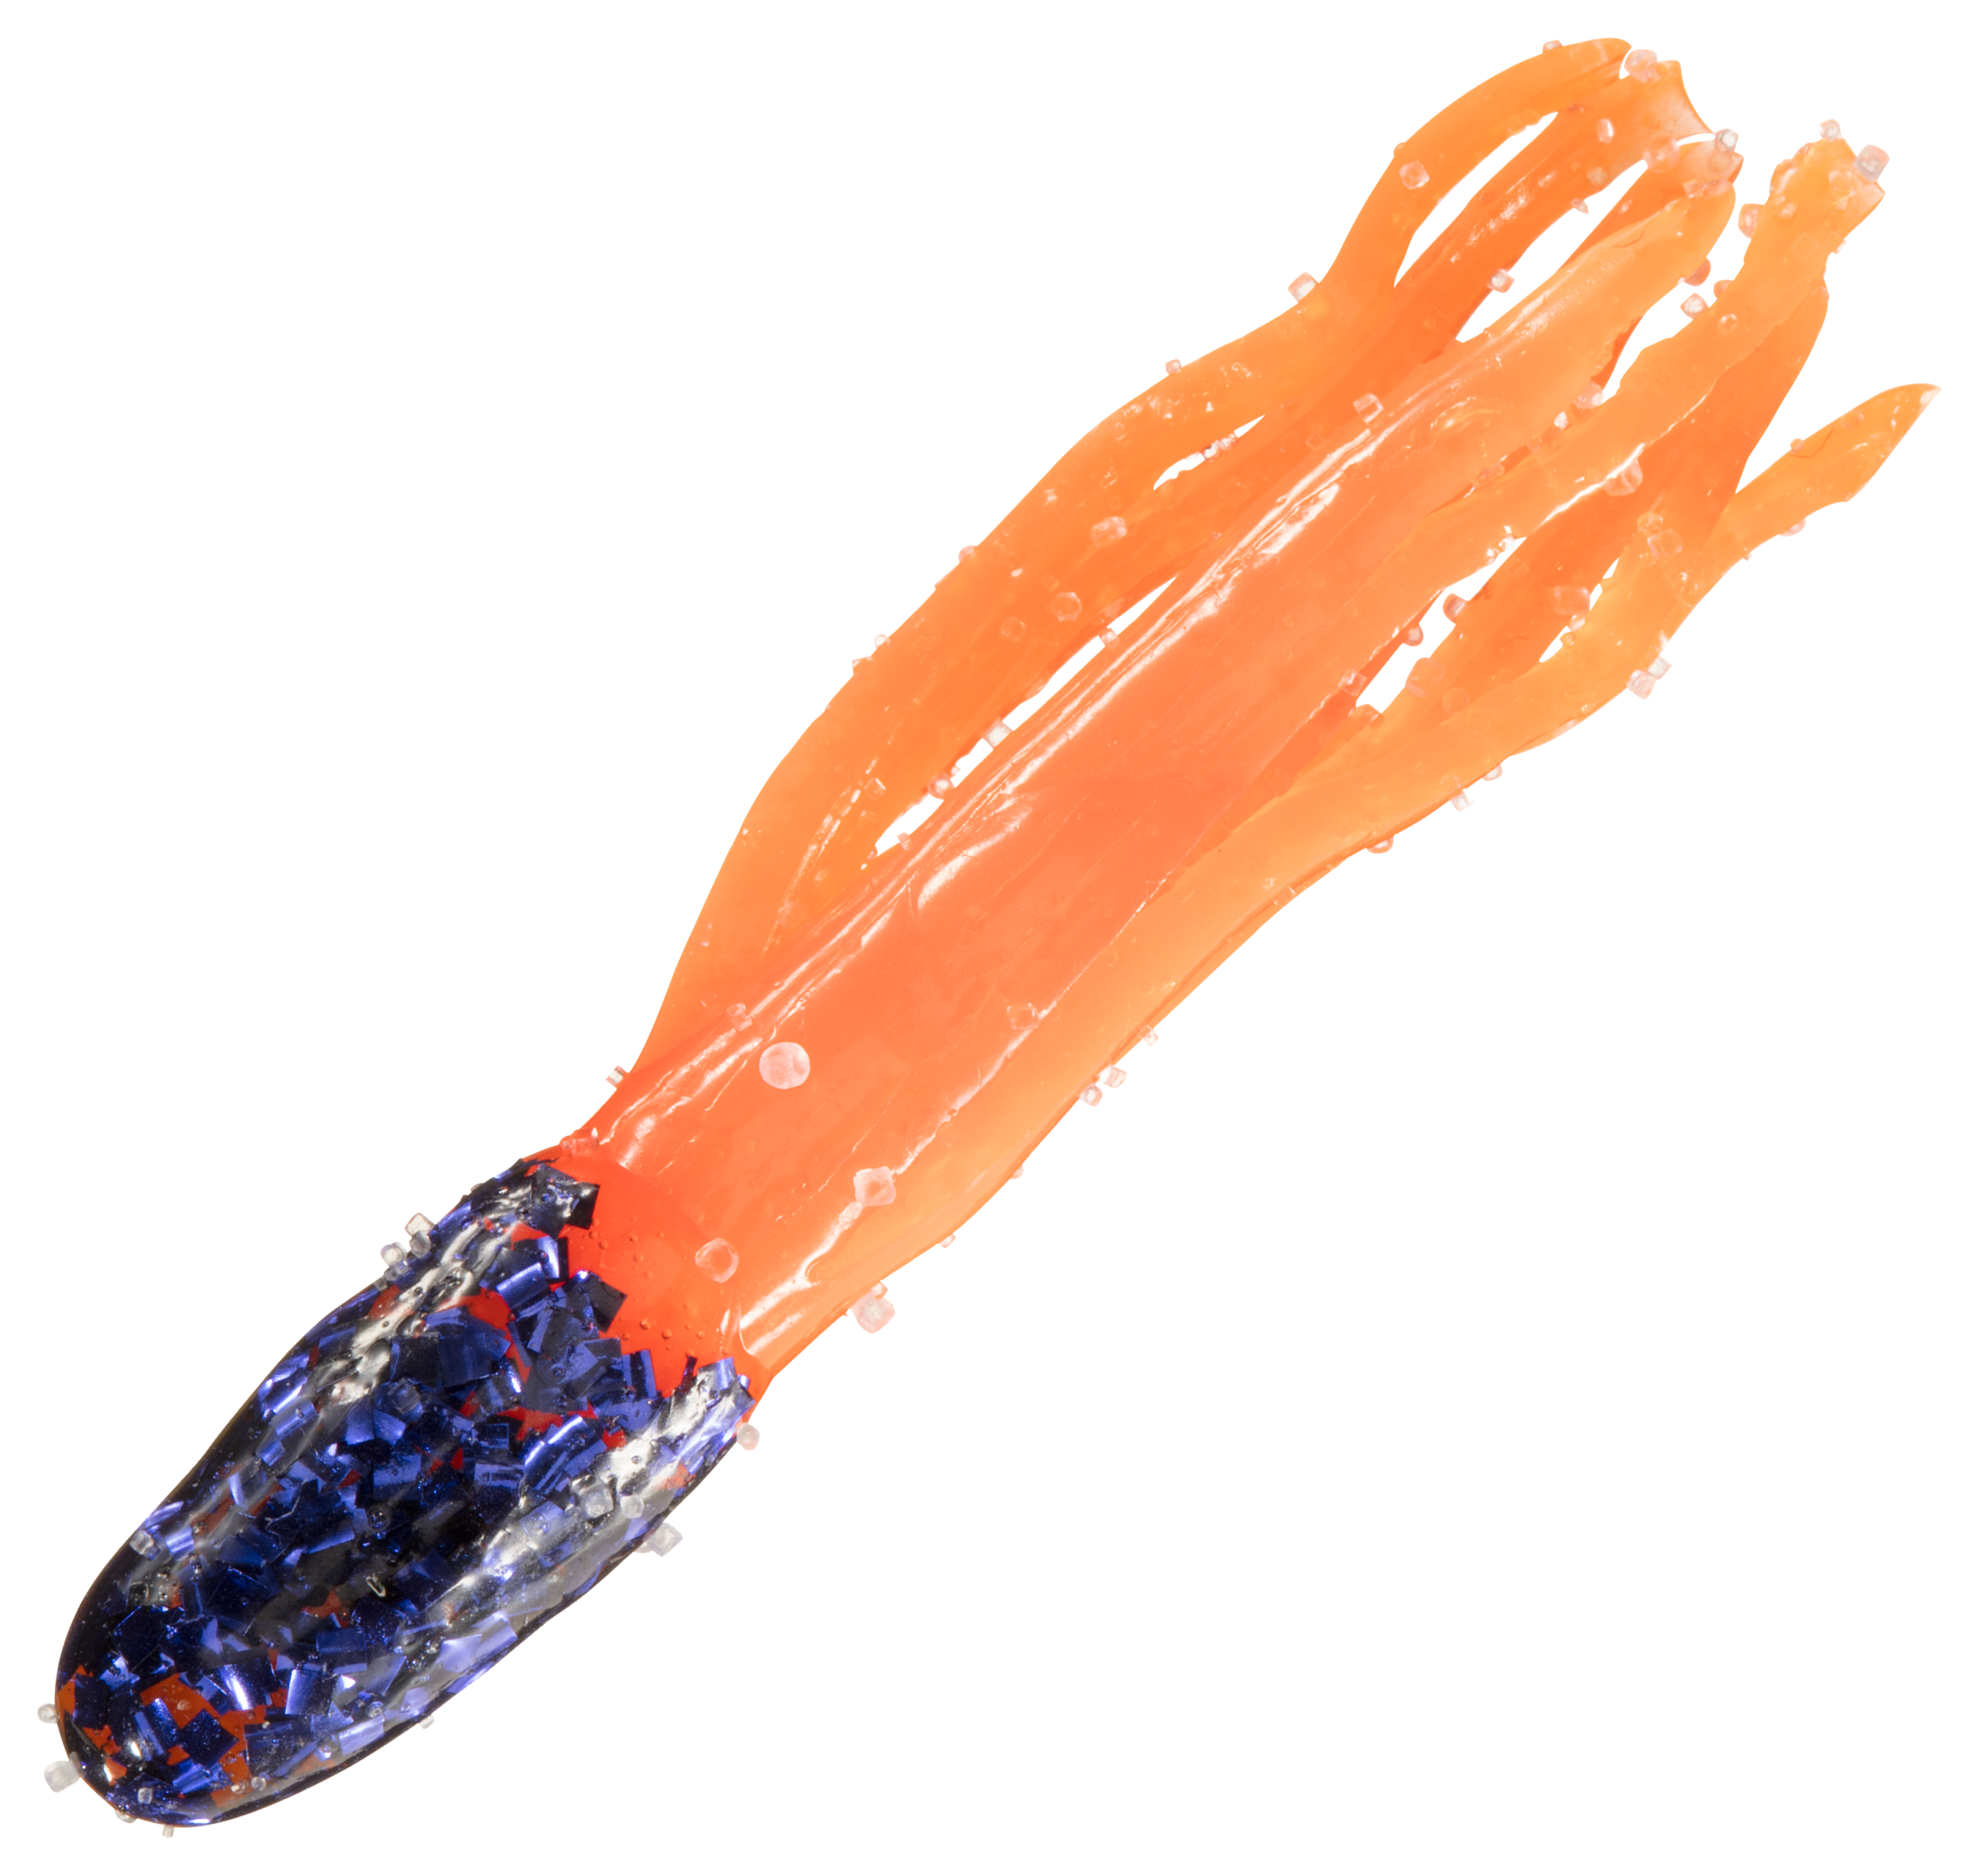 Bass Pro Shops Crappie Maxx Squirmin' Squirts - Electric Violet Blue/Neon Orange